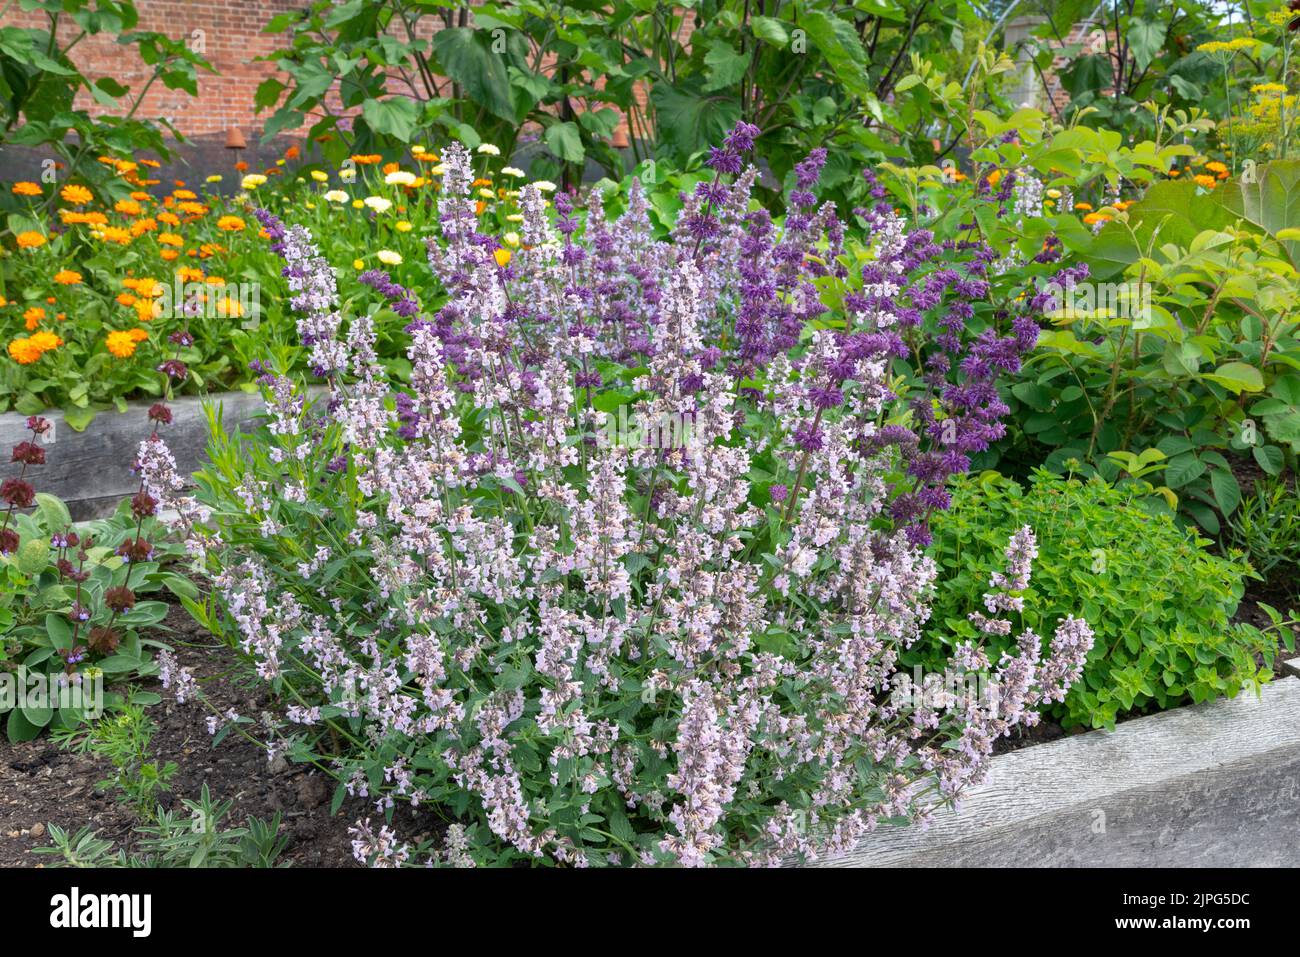 Nepeta (Catmint) planted in raised beds with herbs and annuals to attract pollinating insects to a vegetable garden. Stock Photo